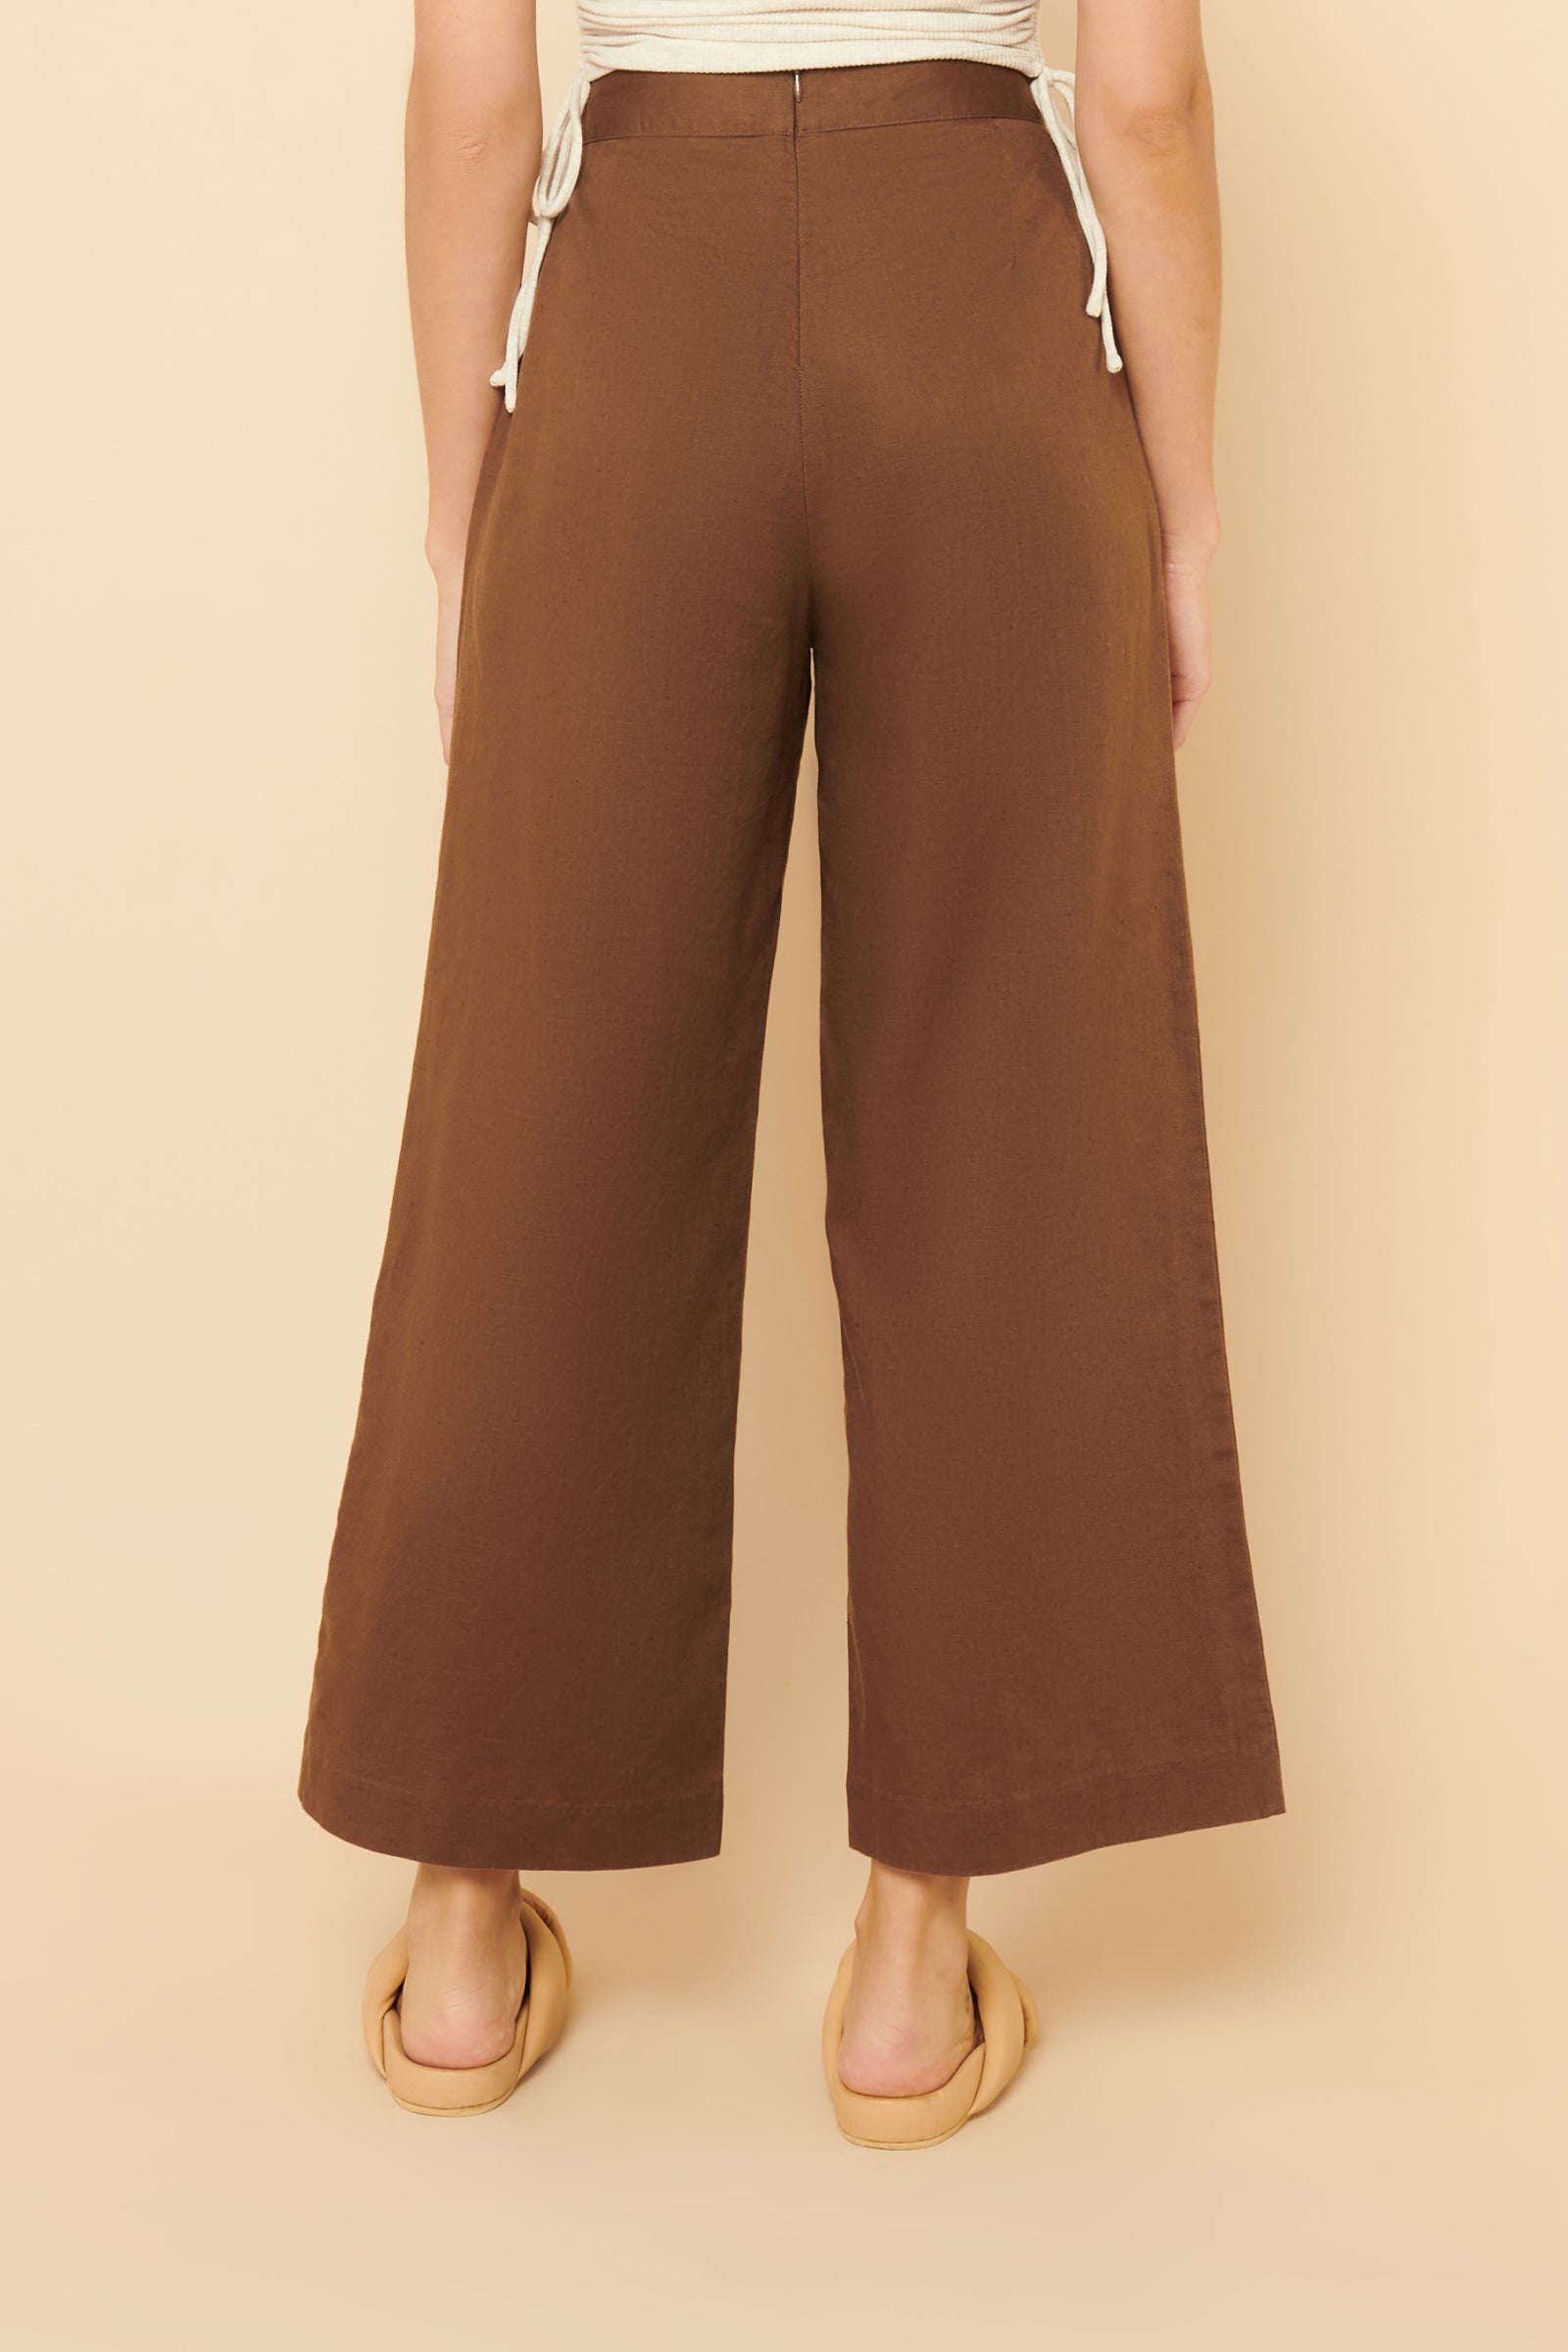 Nude Lucy Selma Wide Leg Pant In A Brown Chocolate Colour 